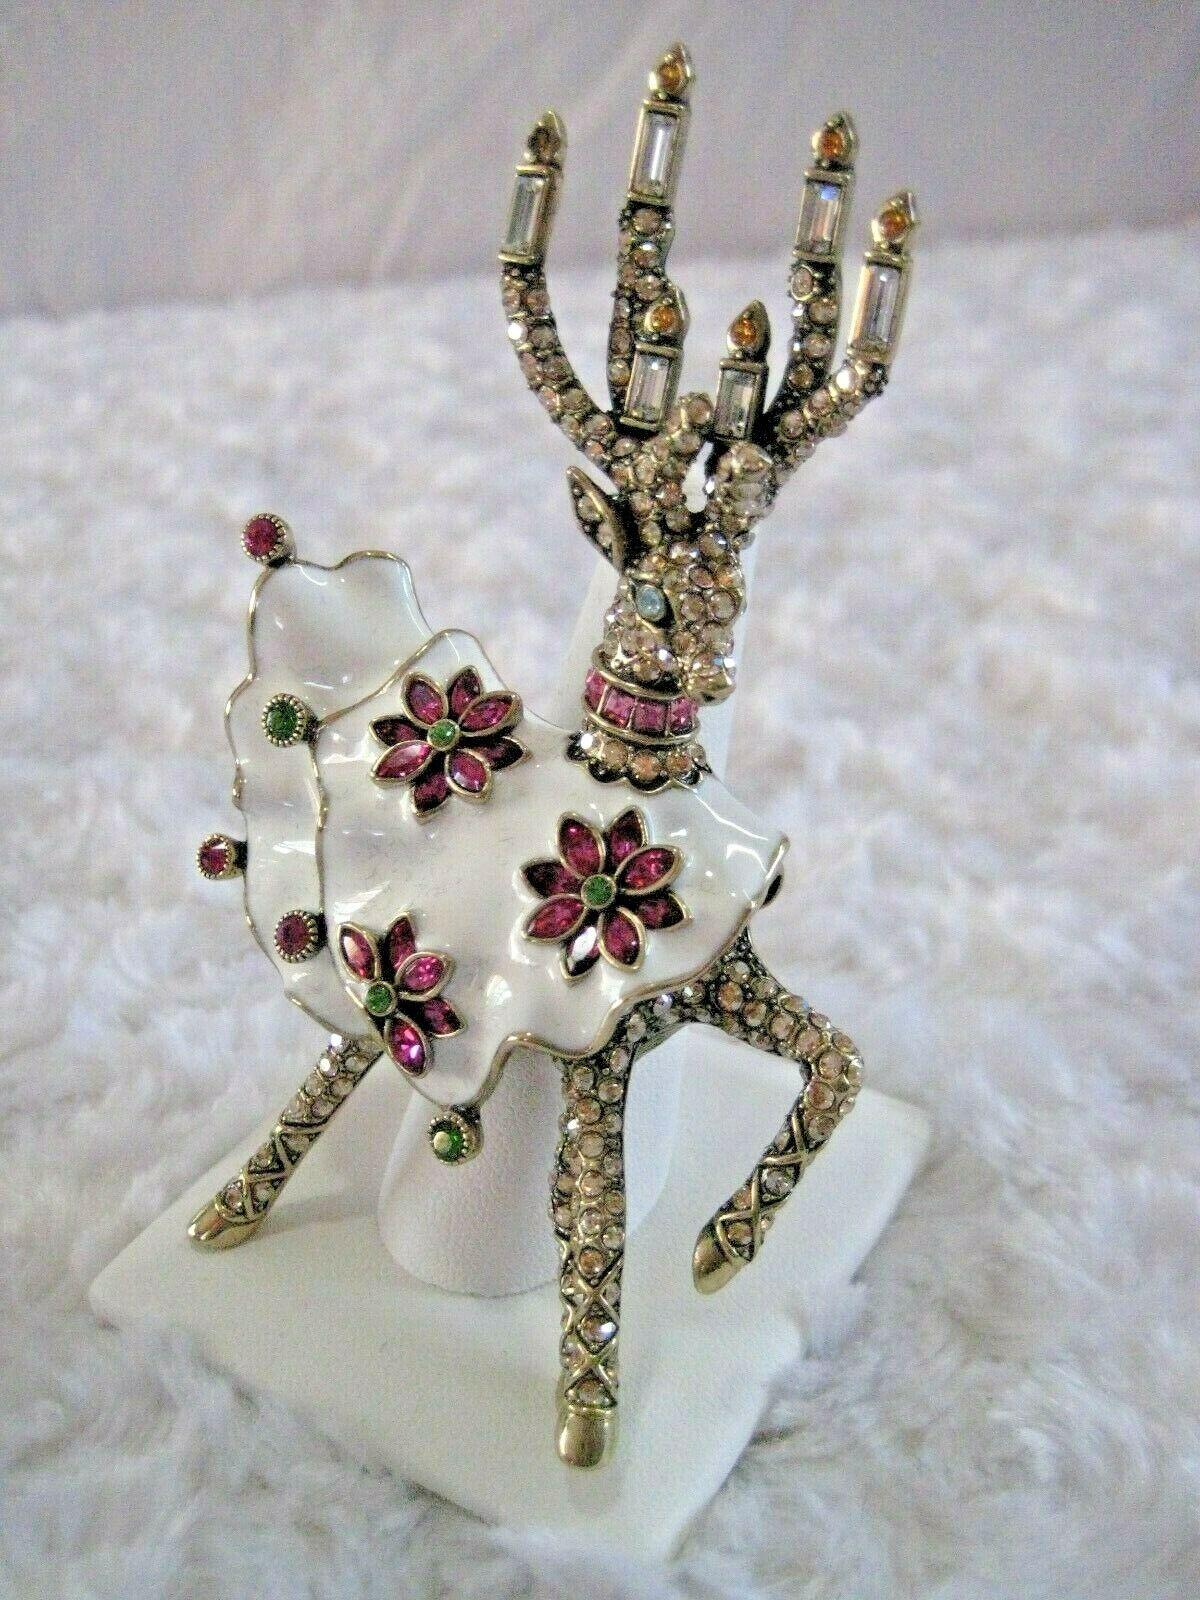 Beautiful Holiday Deer Pin.

Pin Measures
approx.: 3 L X 2 L

Crystals
Crystal golden shadow, aquamarine, crystal, topaz, rose, fuschia, fern green and white enamel

Metal Color:
Bronze tone
Findings:
Joint-and-catch closure
Finish:
Oxidized,